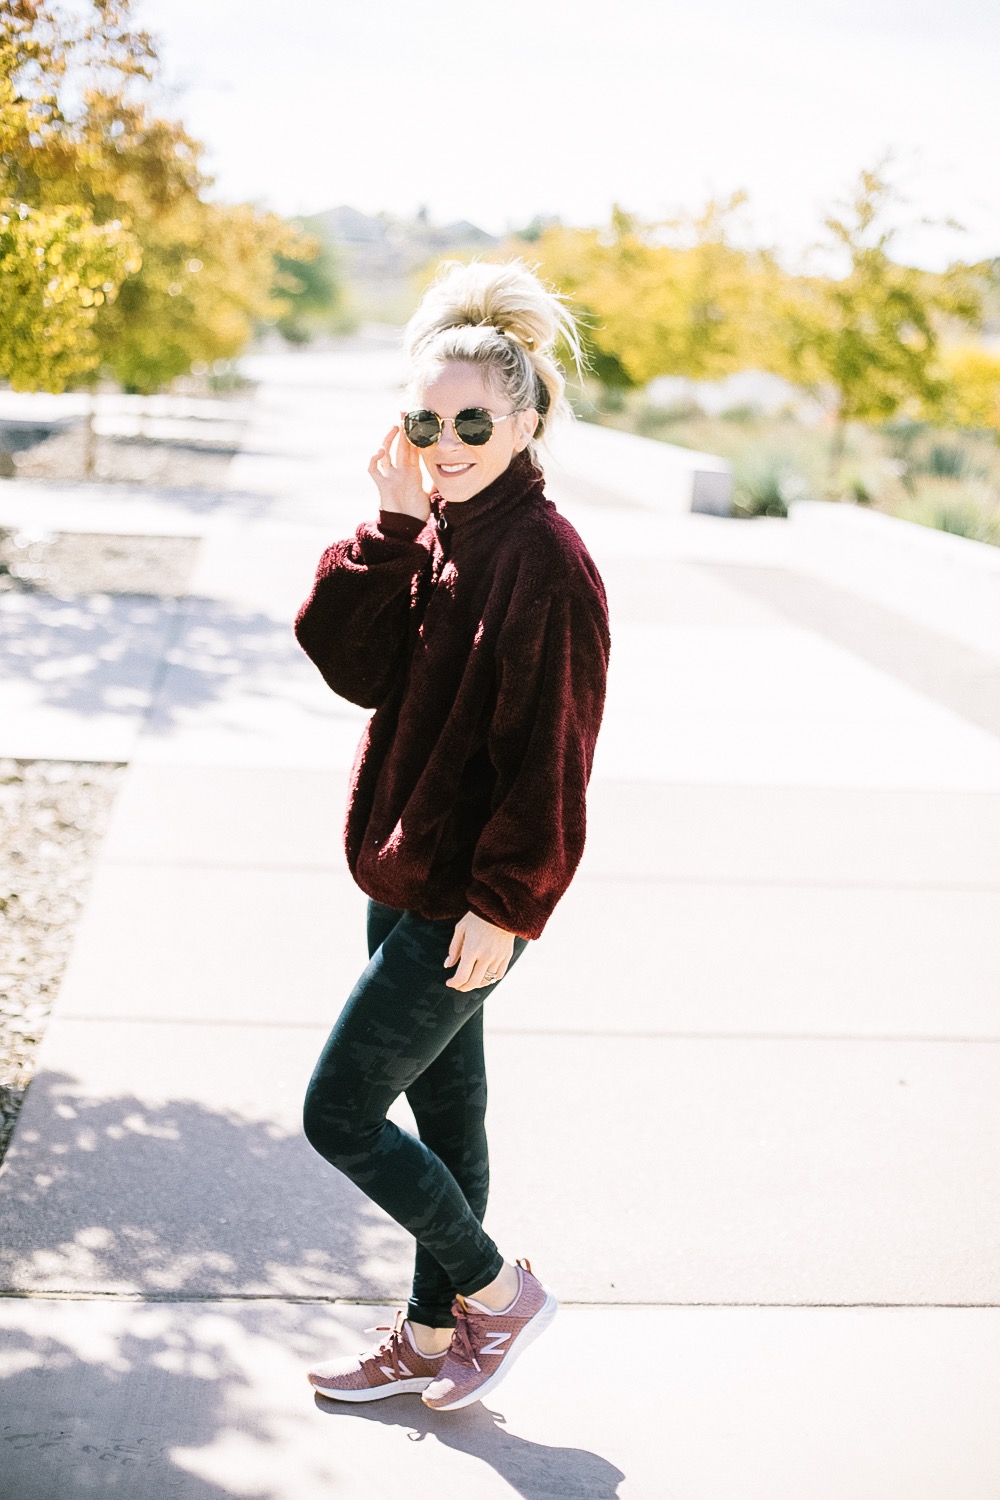 Holiday Shoe Gift Ideas with Kohls featured by top Las Vegas fashion blog, Life of a Sister: image of a woman wearing New Balance Fresh Foam Sneakers